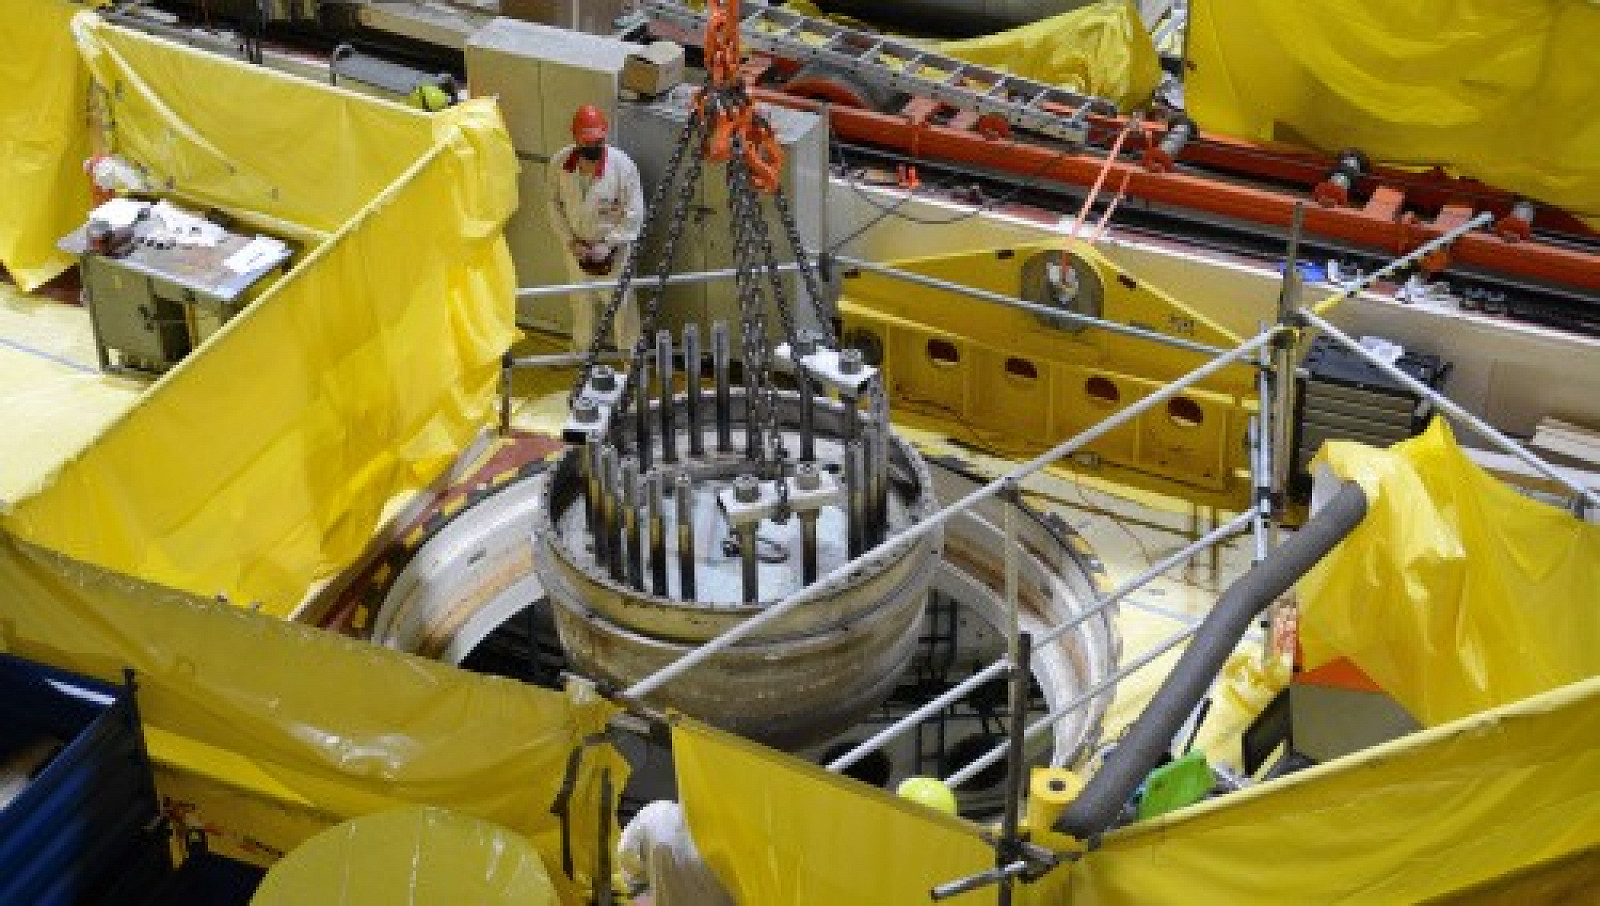 VUJE completed an important stage in the process of dismantling of reactor coolant system large components in V1 NPP